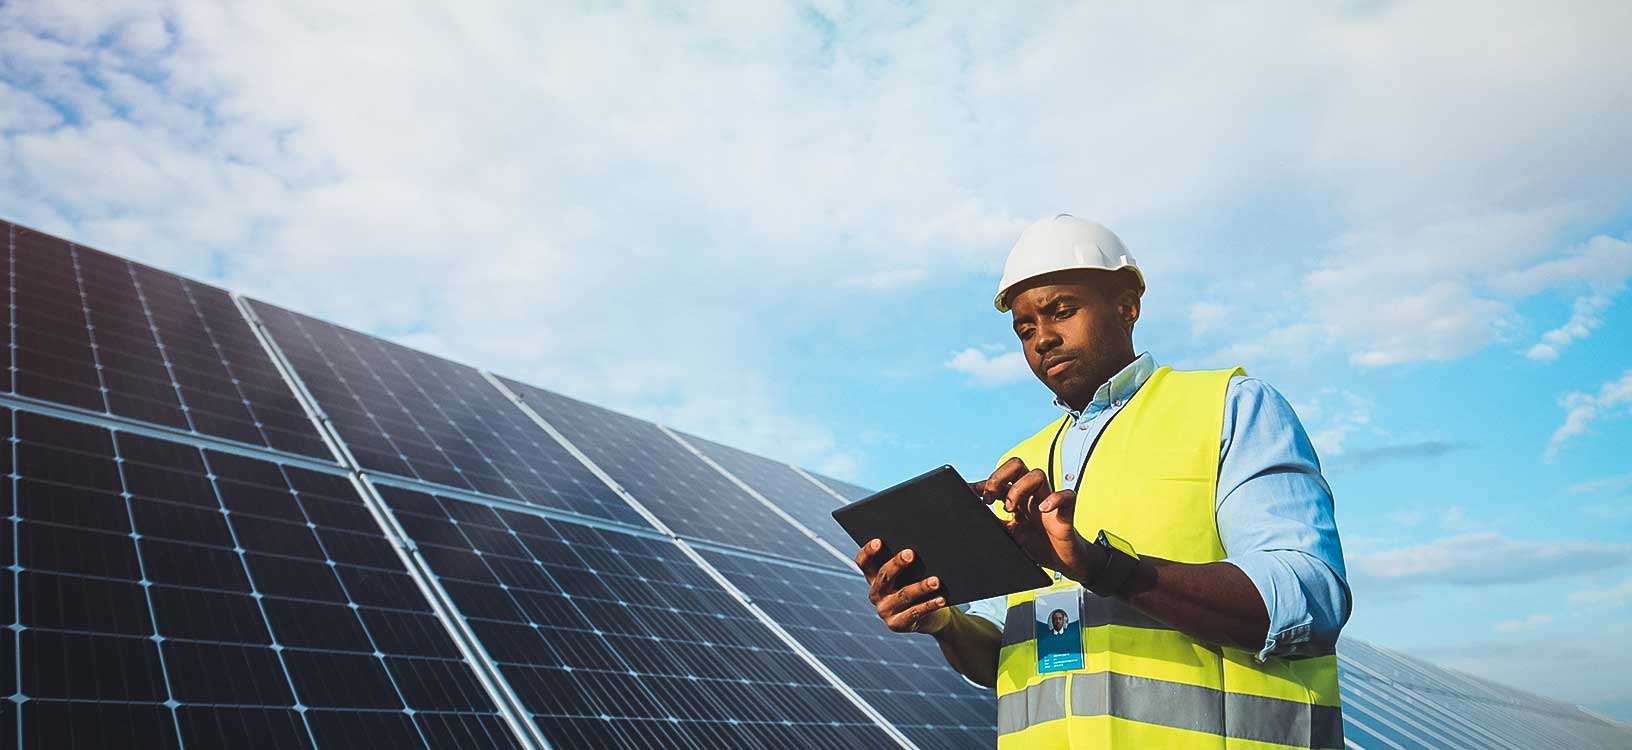 Operations manager checks the current operational status of a solar farm using a tablet.